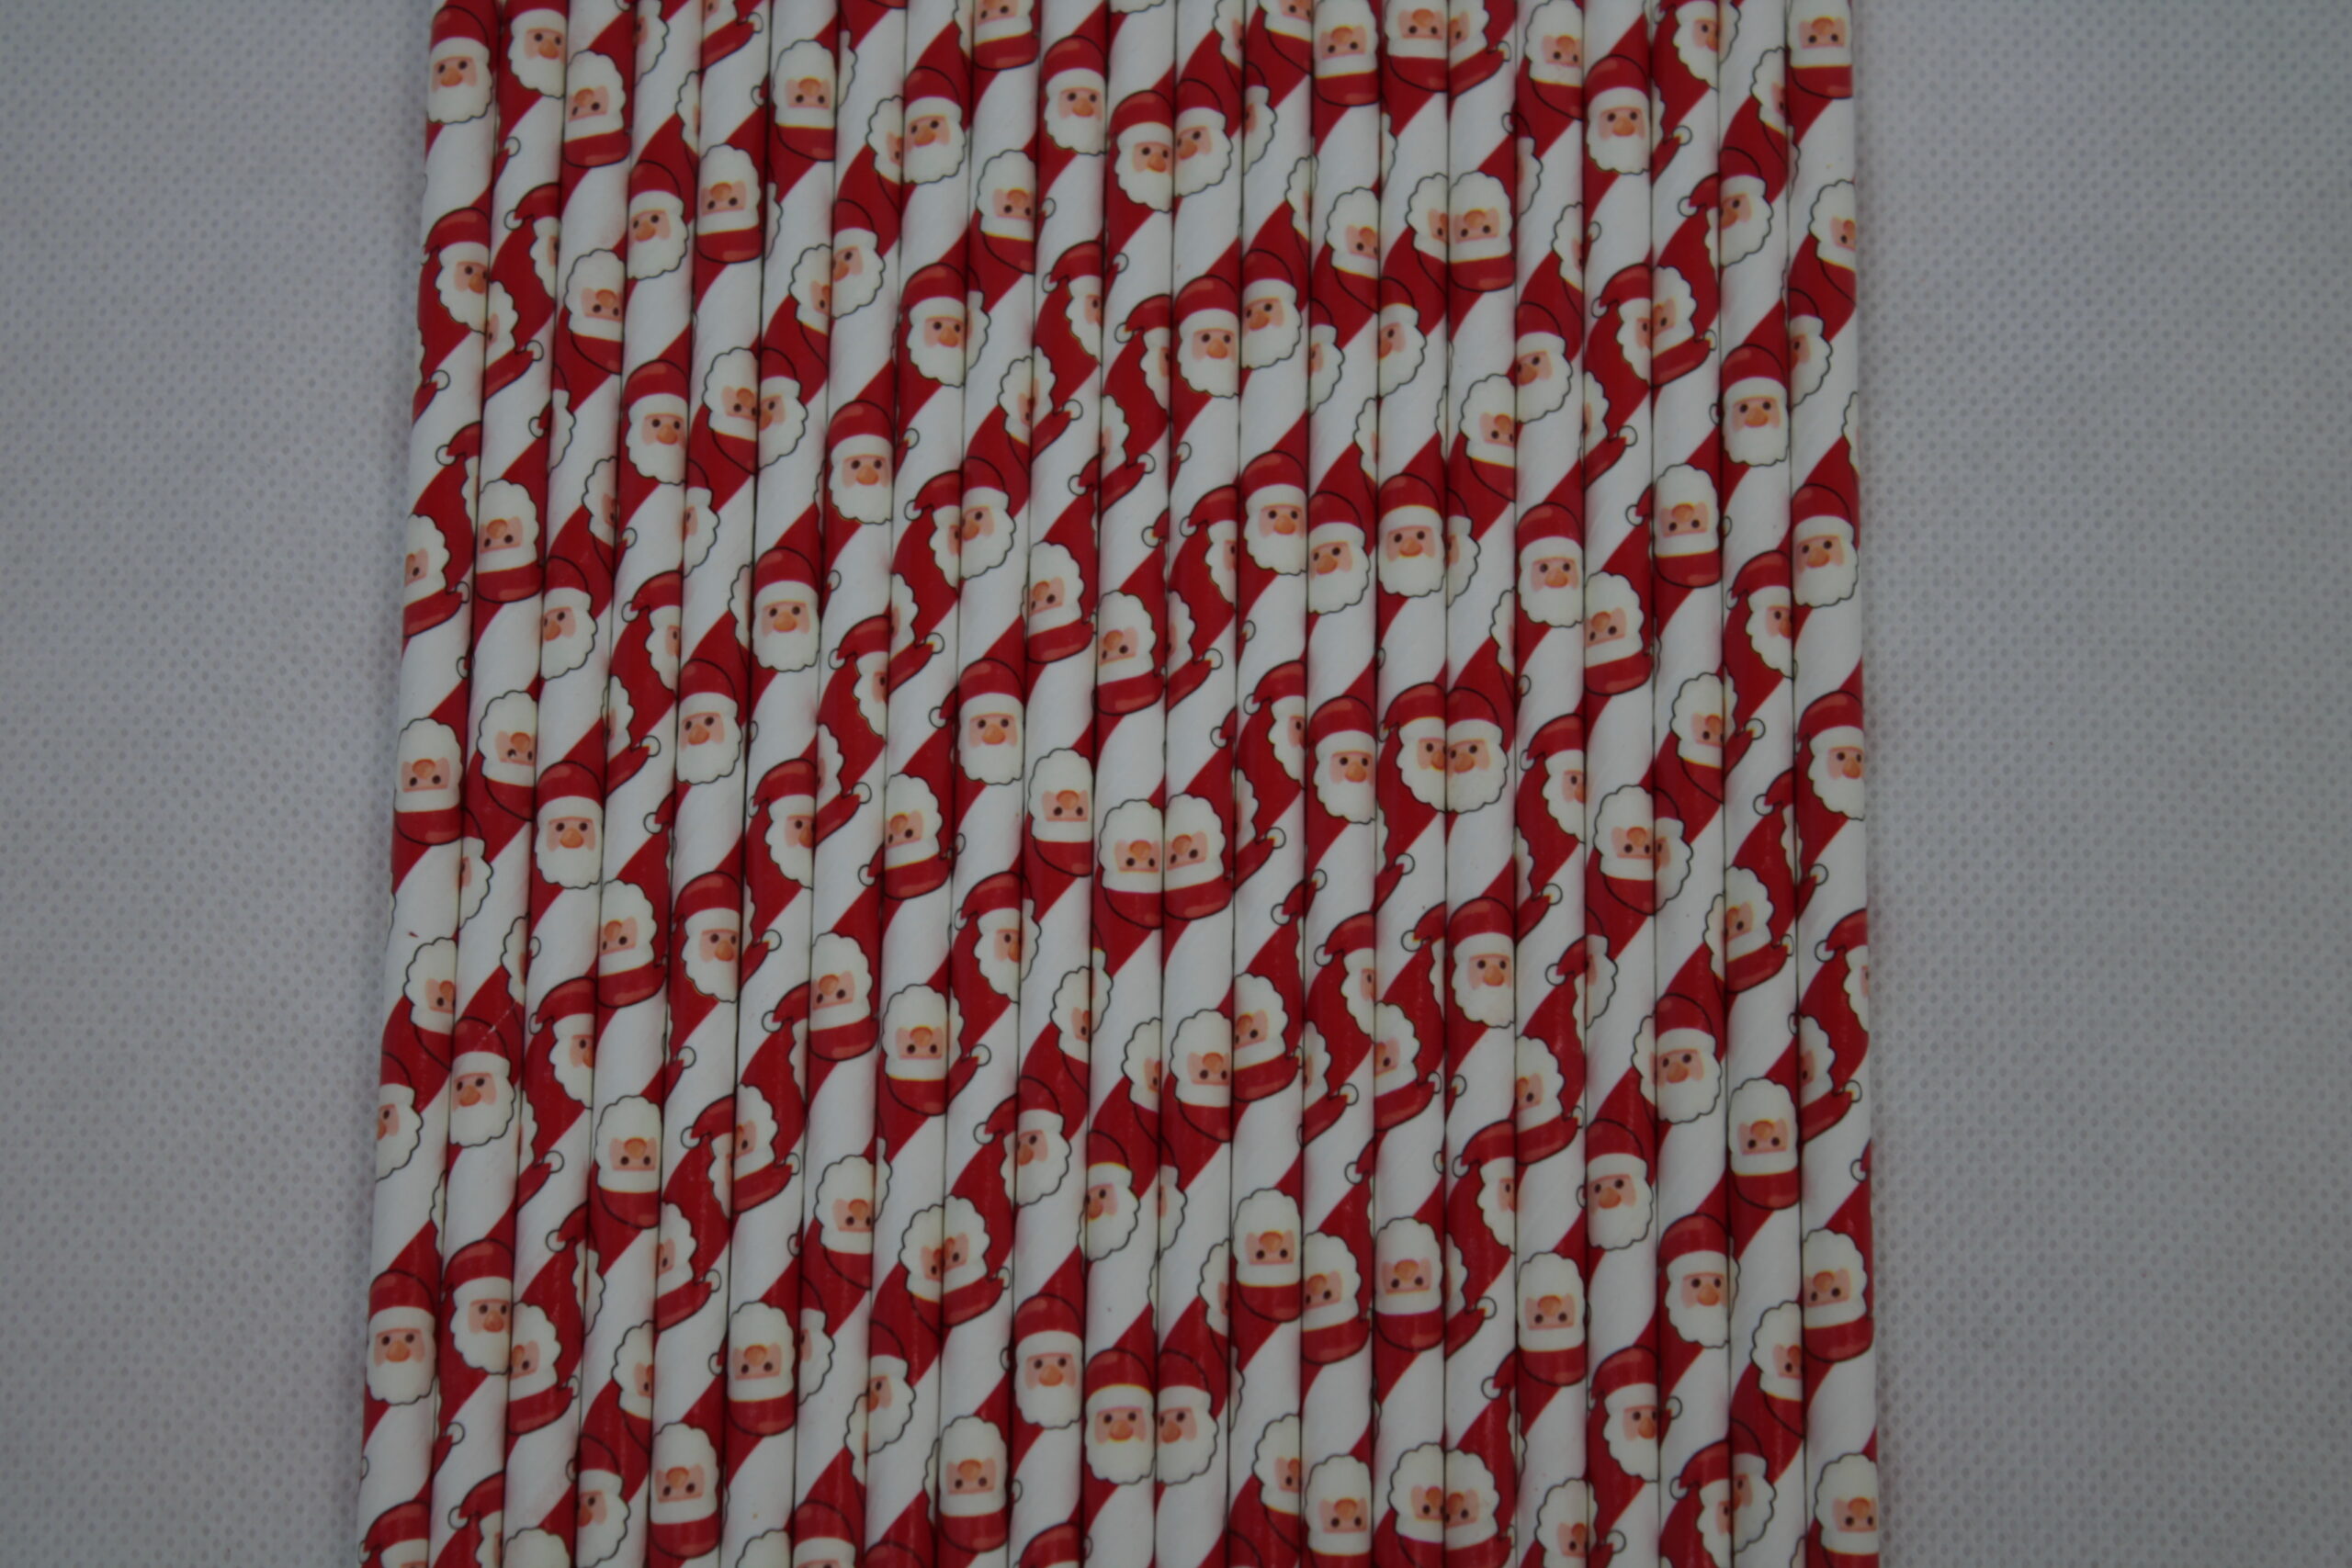 Festive Bespoke Paper Straws

Red Striped Paper Straws with printed Santa faces.